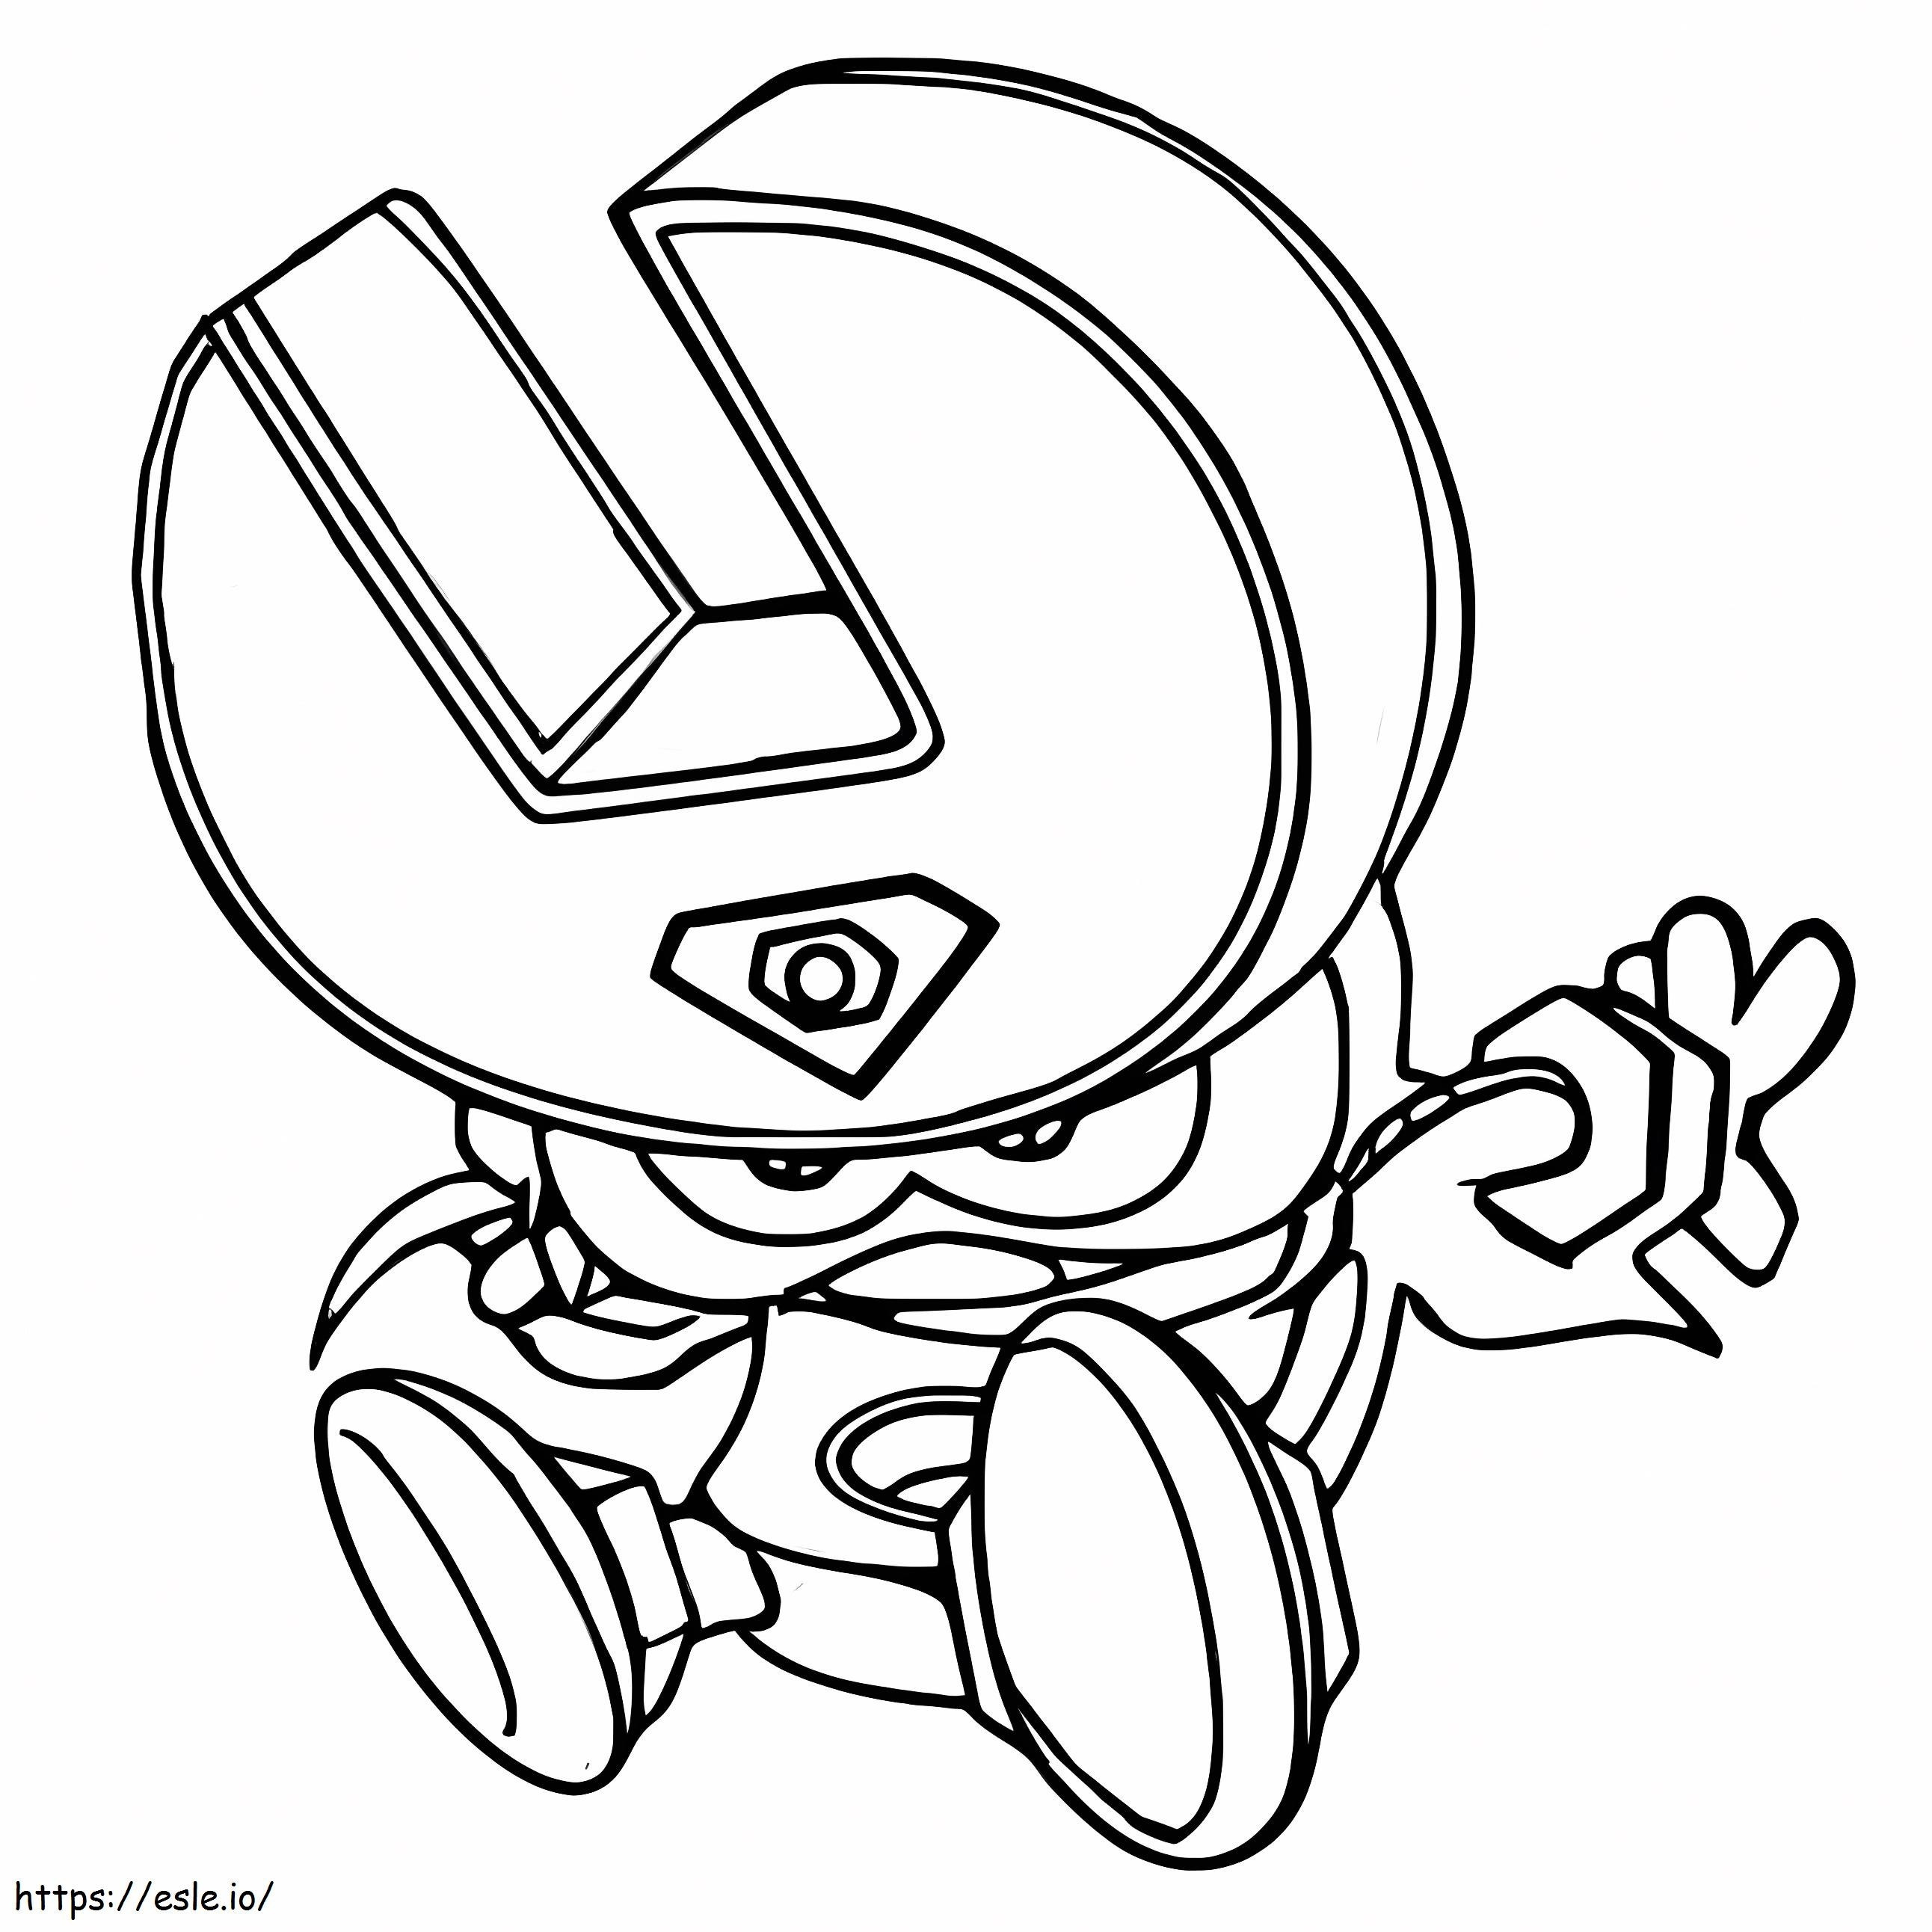 Metal Crunch Superzings coloring page